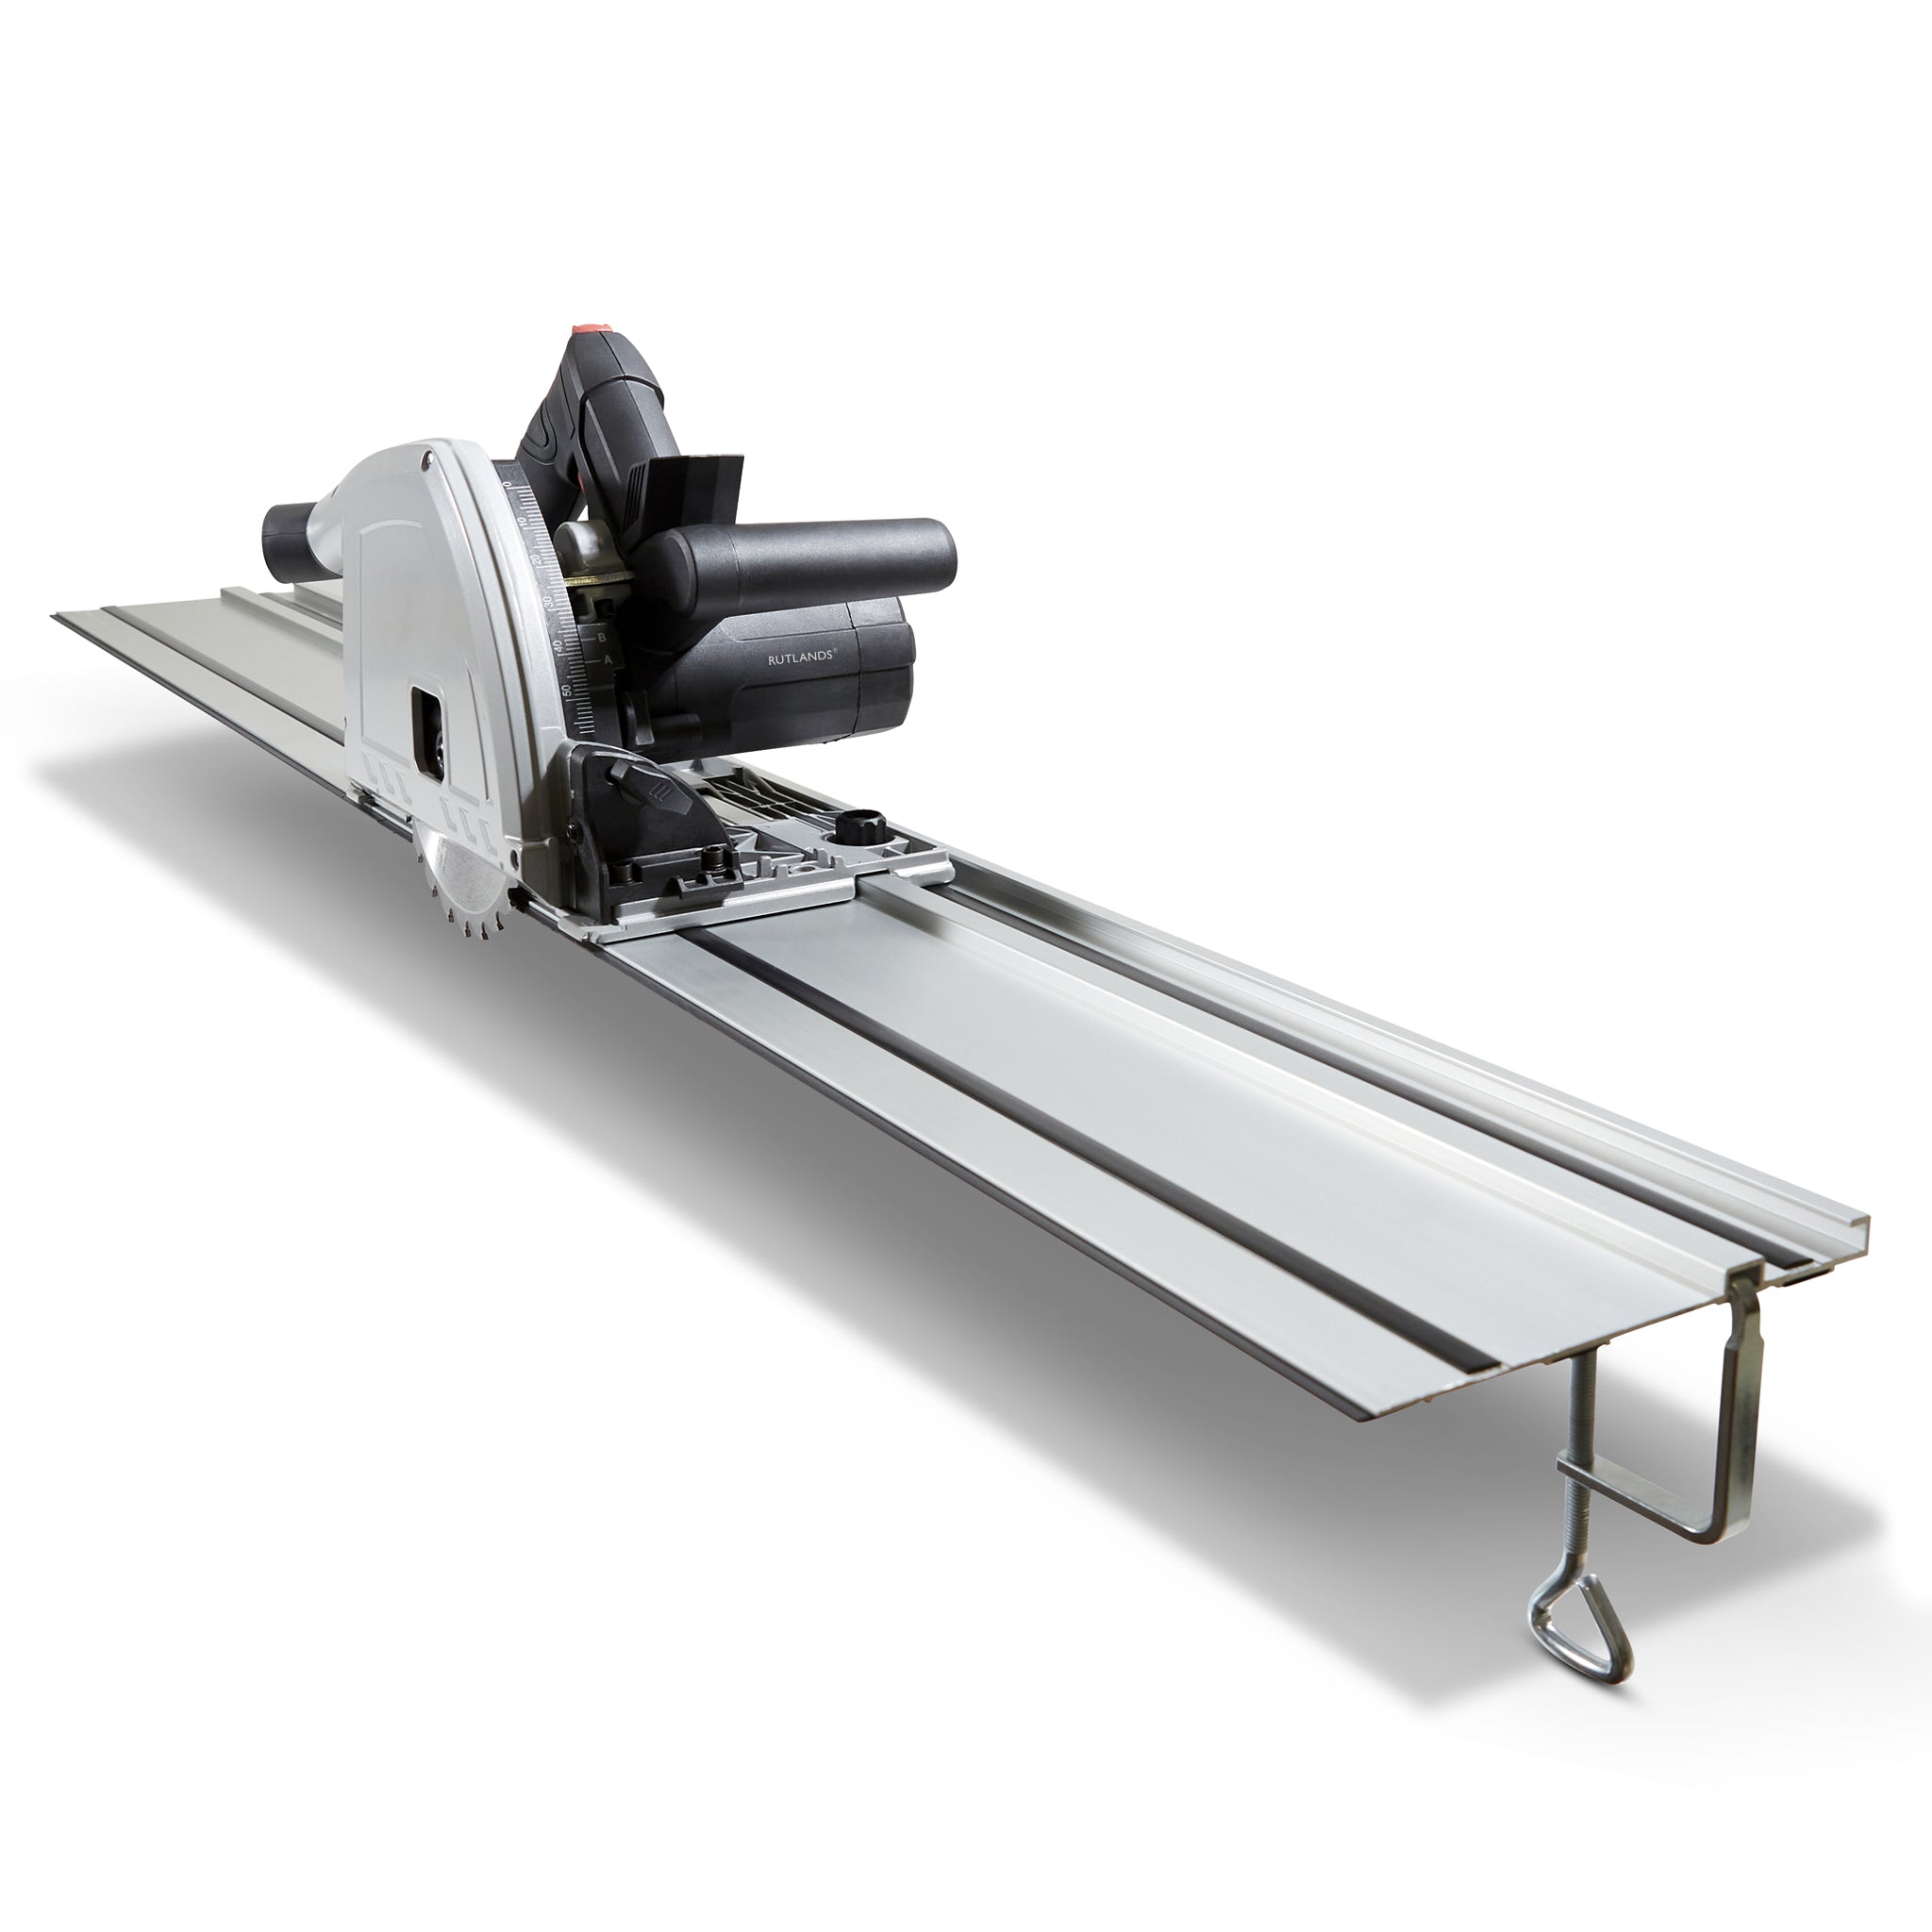 Plunge Saw with Guide Rail